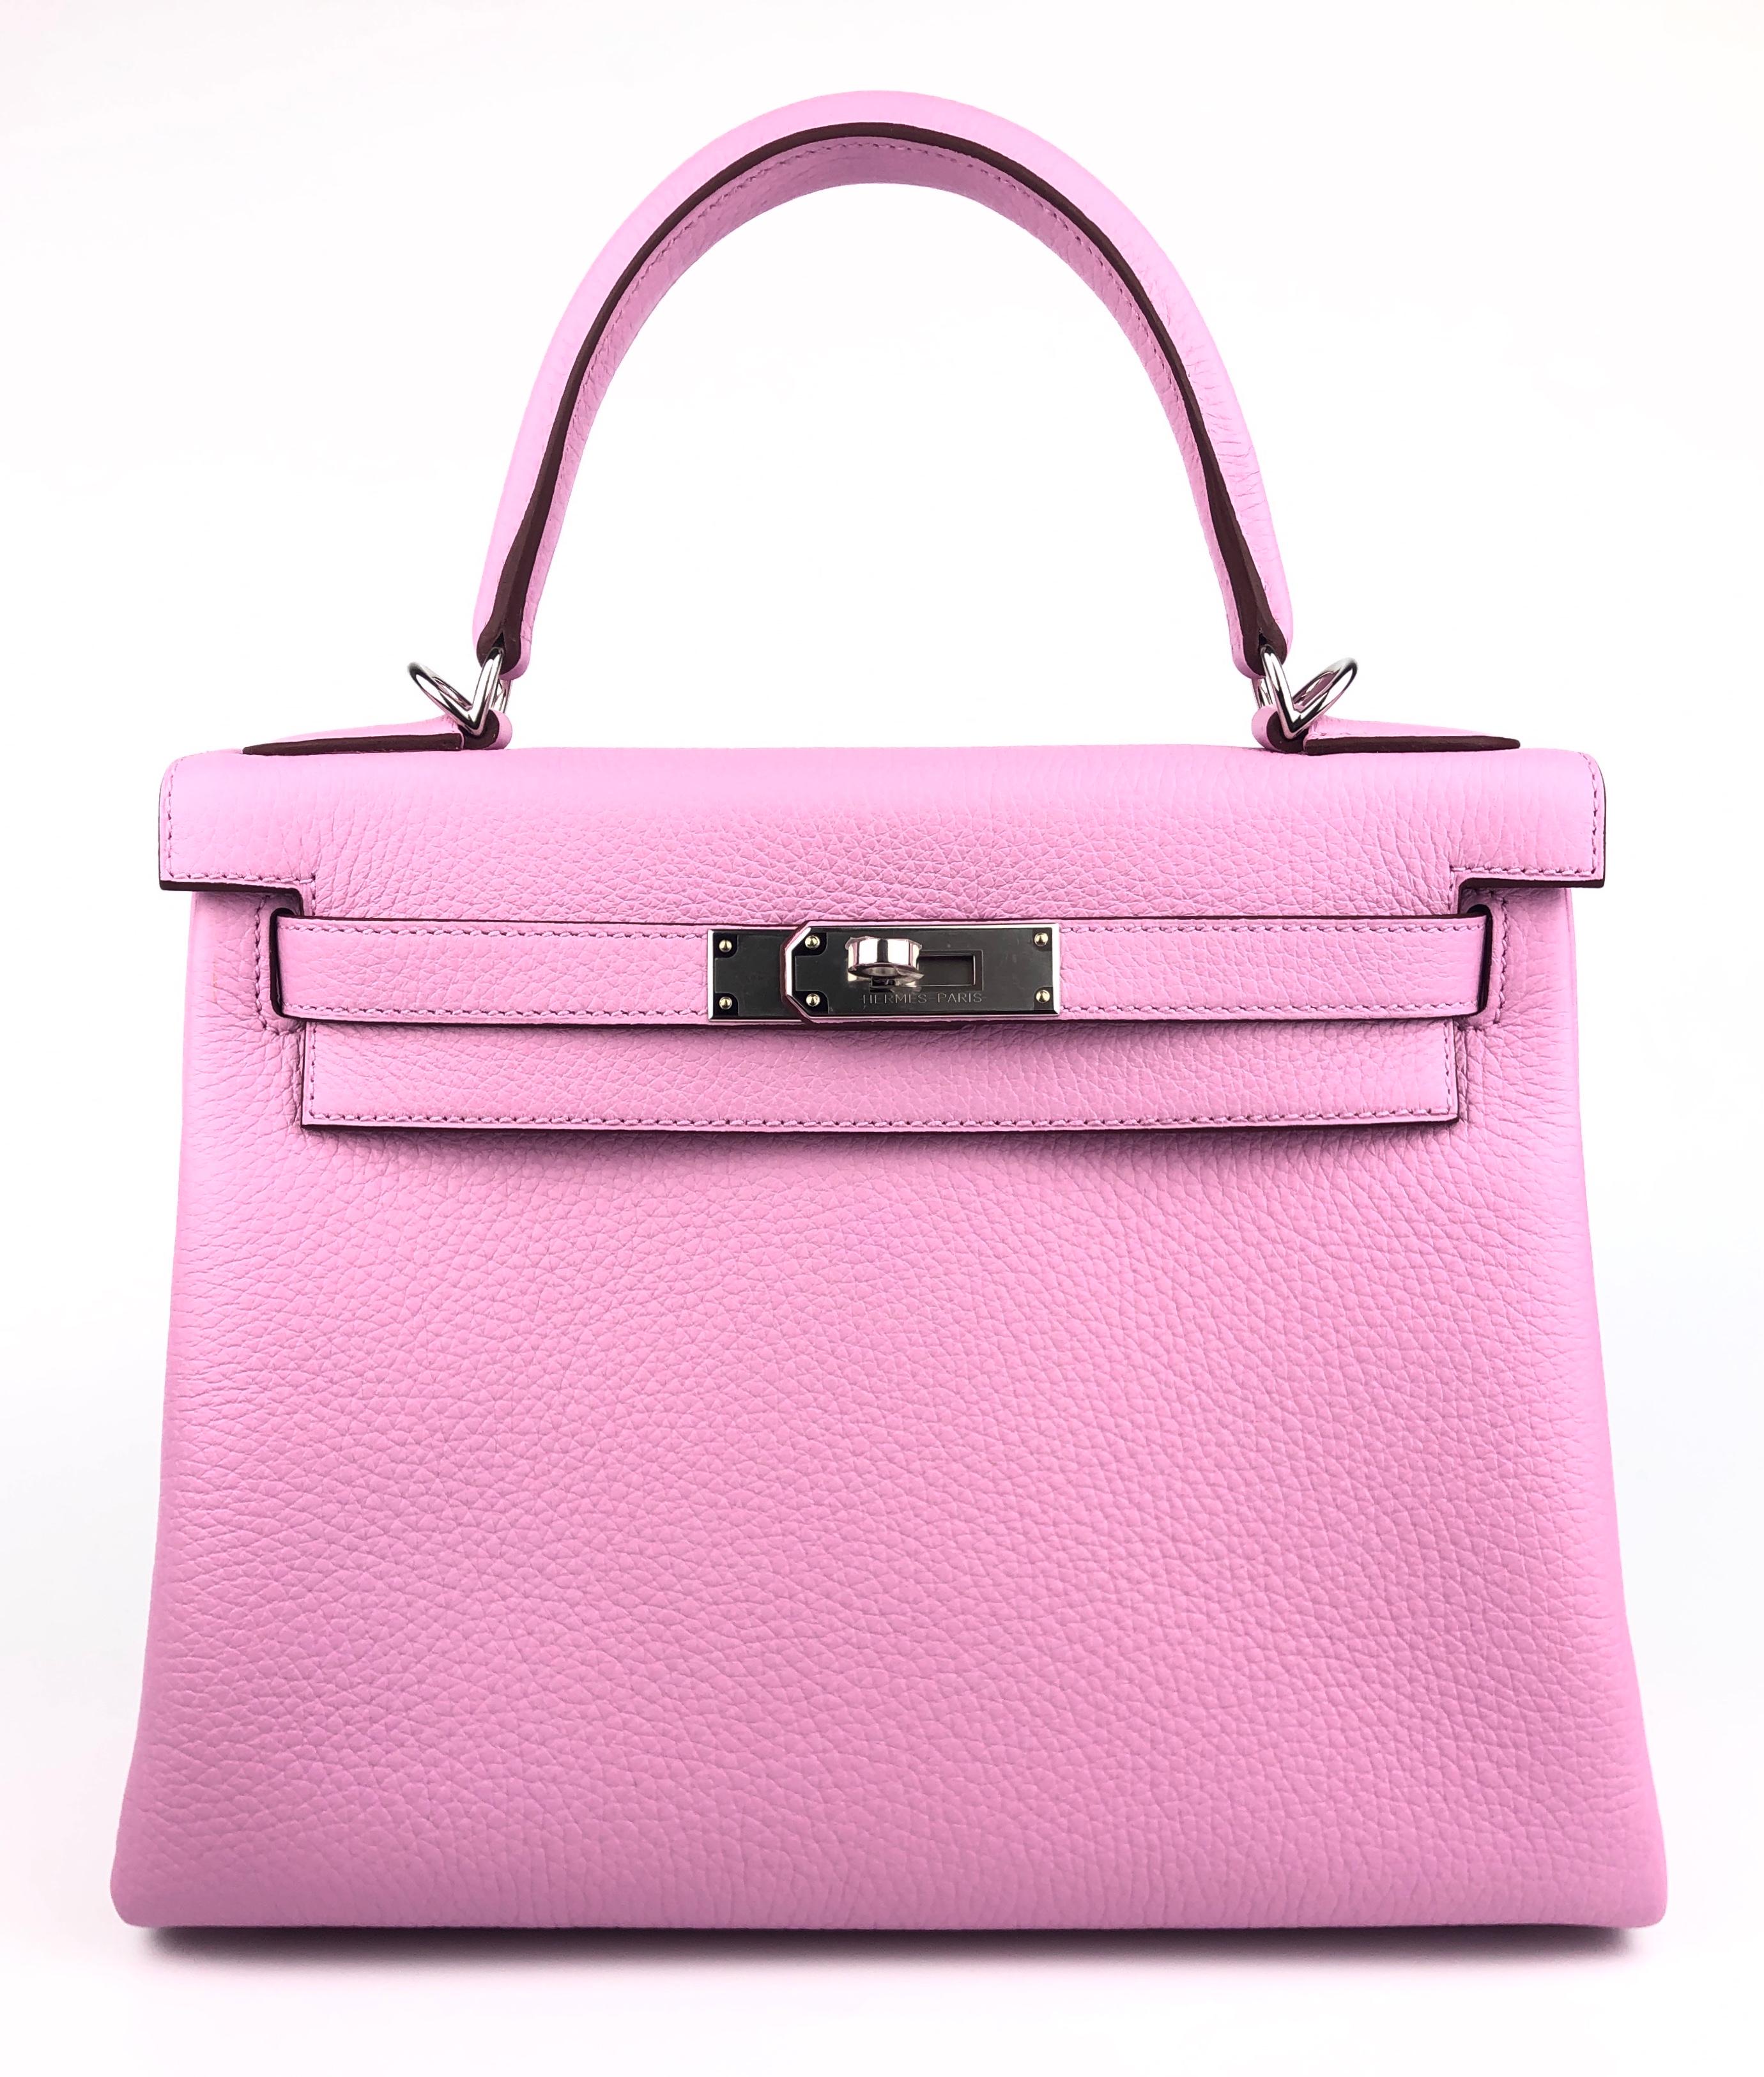 New 2022 RARE Hermes Kelly 28 Mauve Sylvester Palladium Hardware. NEW U STAMP 2022. Includes all accessories and Box. 


Shop with confidence from Lux Addicts. Authenticity Guaranteed!